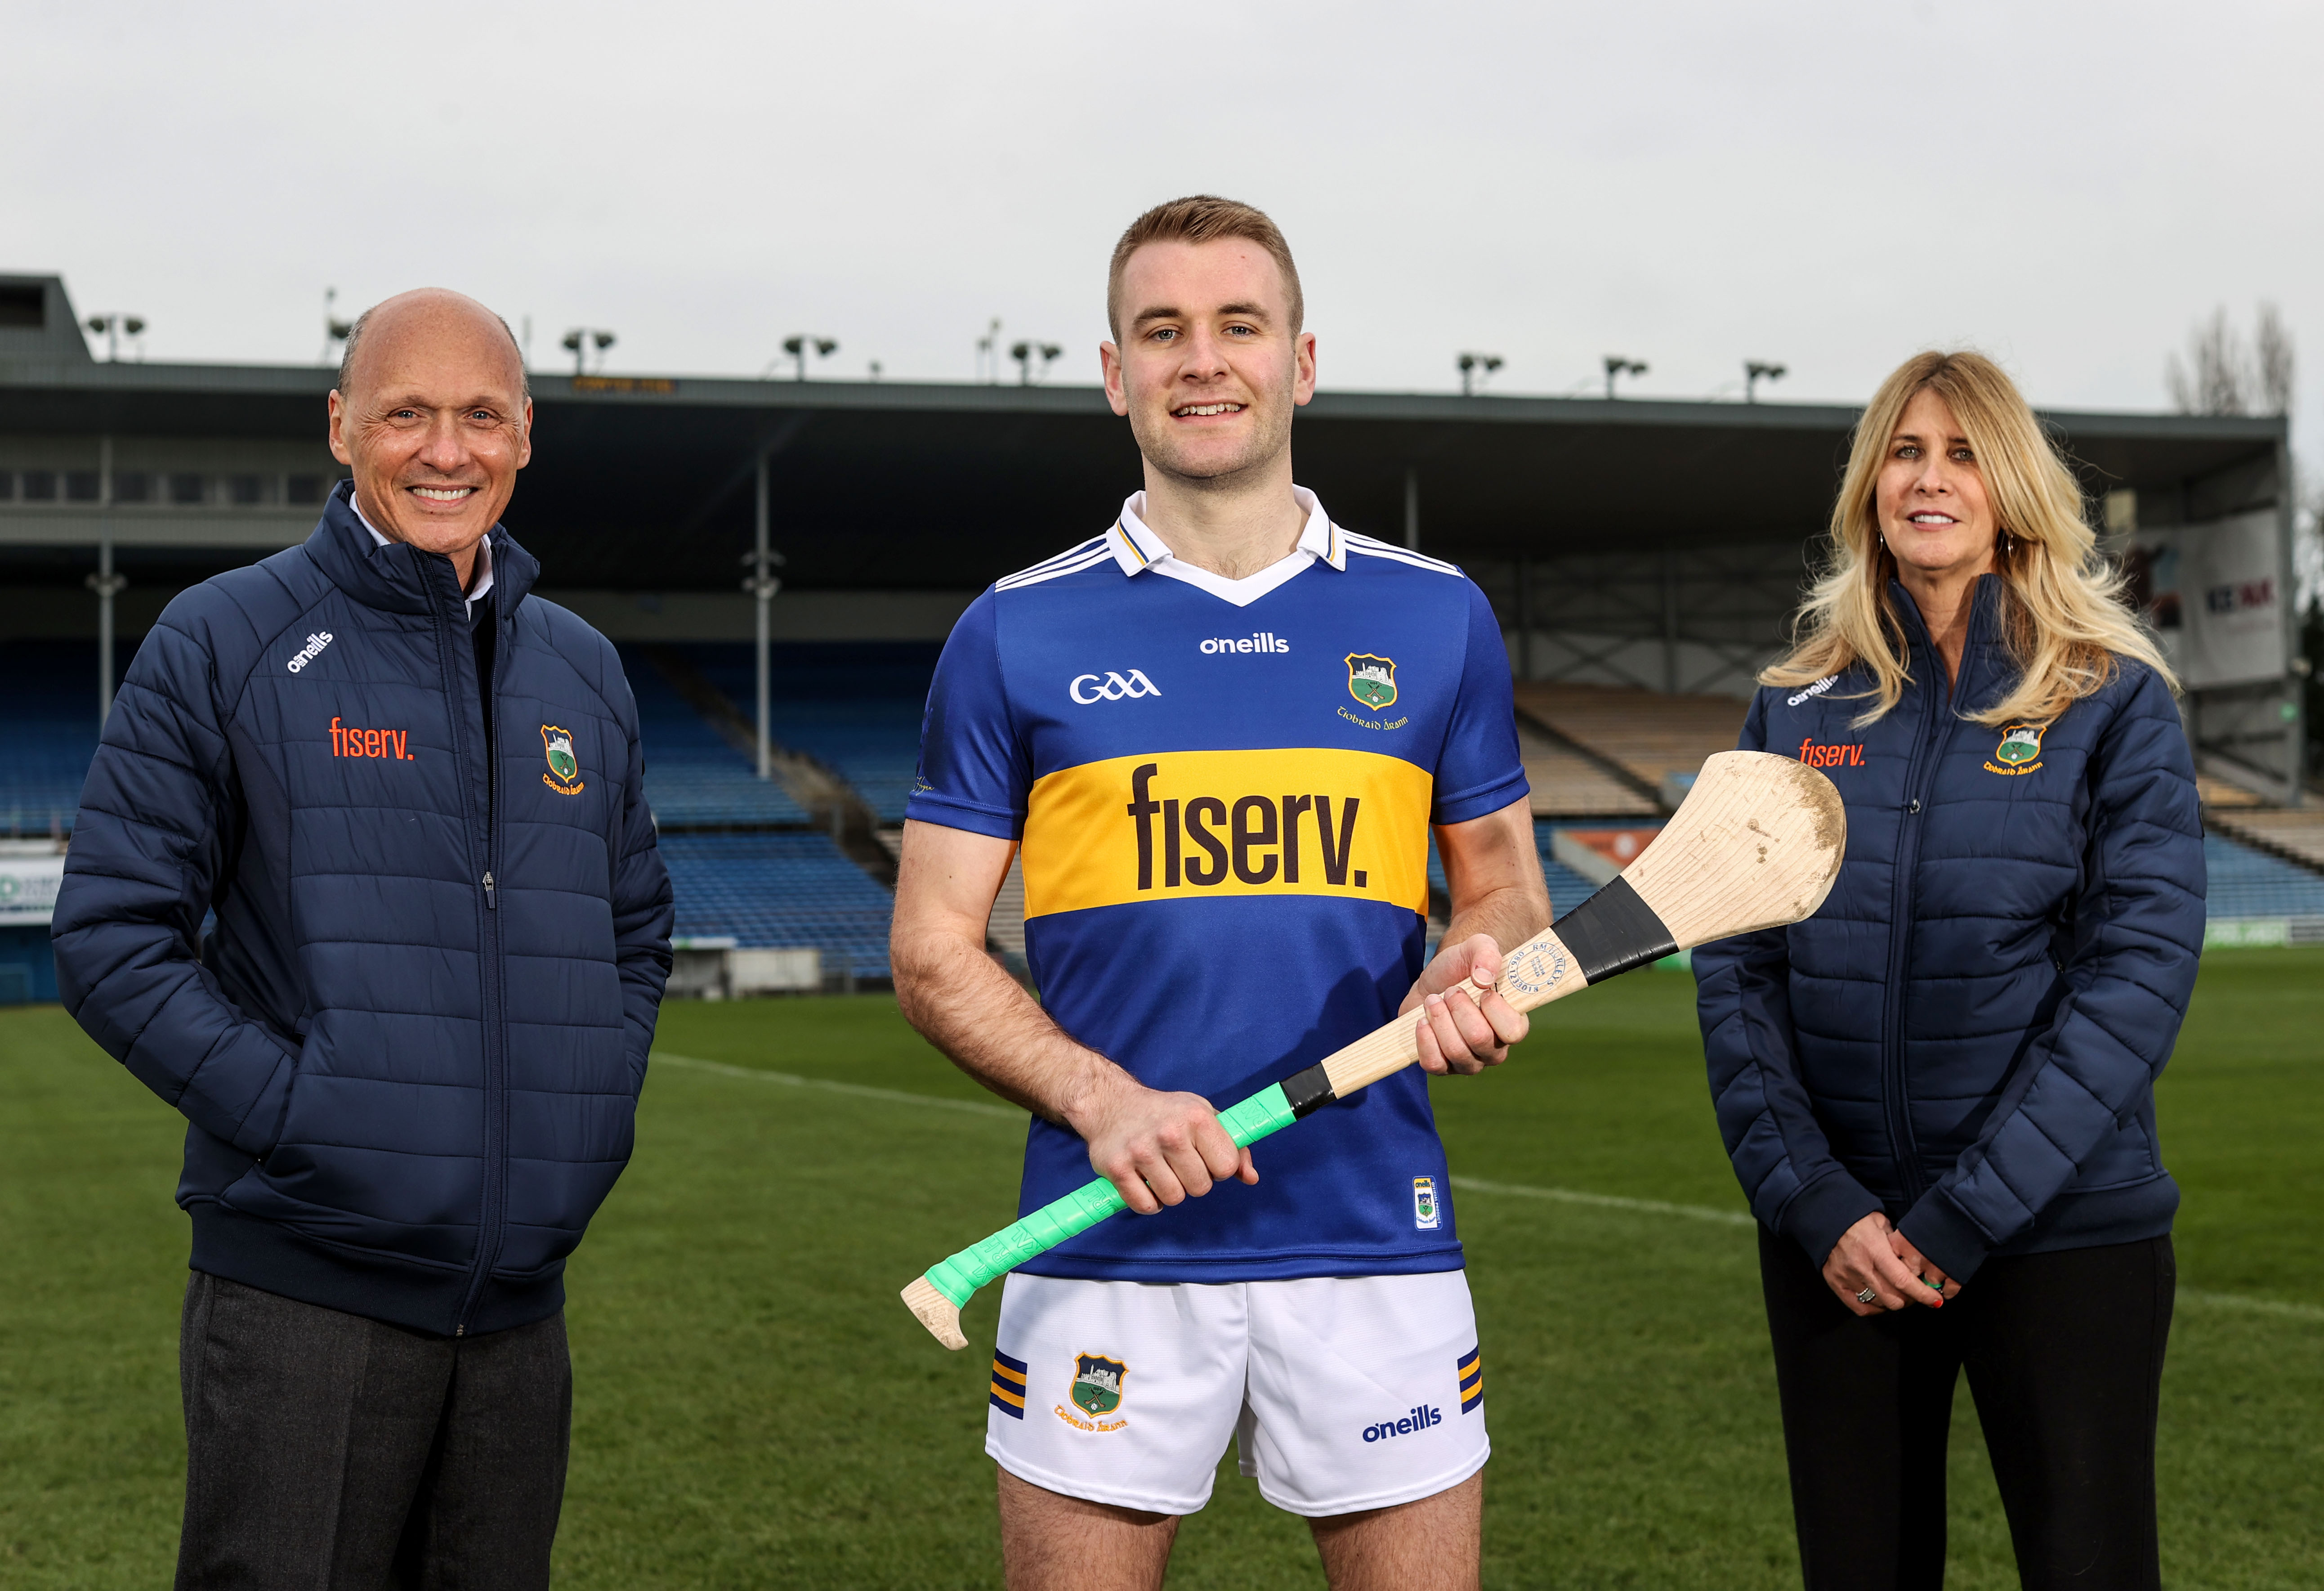 REPRO FREE***PRESS RELEASE NO REPRODUCTION FEE*** EDITORIAL USE ONLY Tipperary GAA Announce Two Year Sponsorship Deal with Fiserv 21/1/2022 At the announcement of a two-year sponsorship deal between Fiserv and Tipperary GAA is John Gibbons, Head of EMEA Fiserv, John McGrath Tipperary GAA Senior Hurler and Janice Von Bulow, Senior Vie-President and General Manager Fiserv. Fiserv is a leading global provider of payments and financial services technology solutions, employing over 200 people at its flagship technology centre in Nenagh and over 400 in Dublin, with ambitious plans to add another 300 people across Nenagh and Dublin. Mandatory Credit ©INPHO/Dan Sheridan